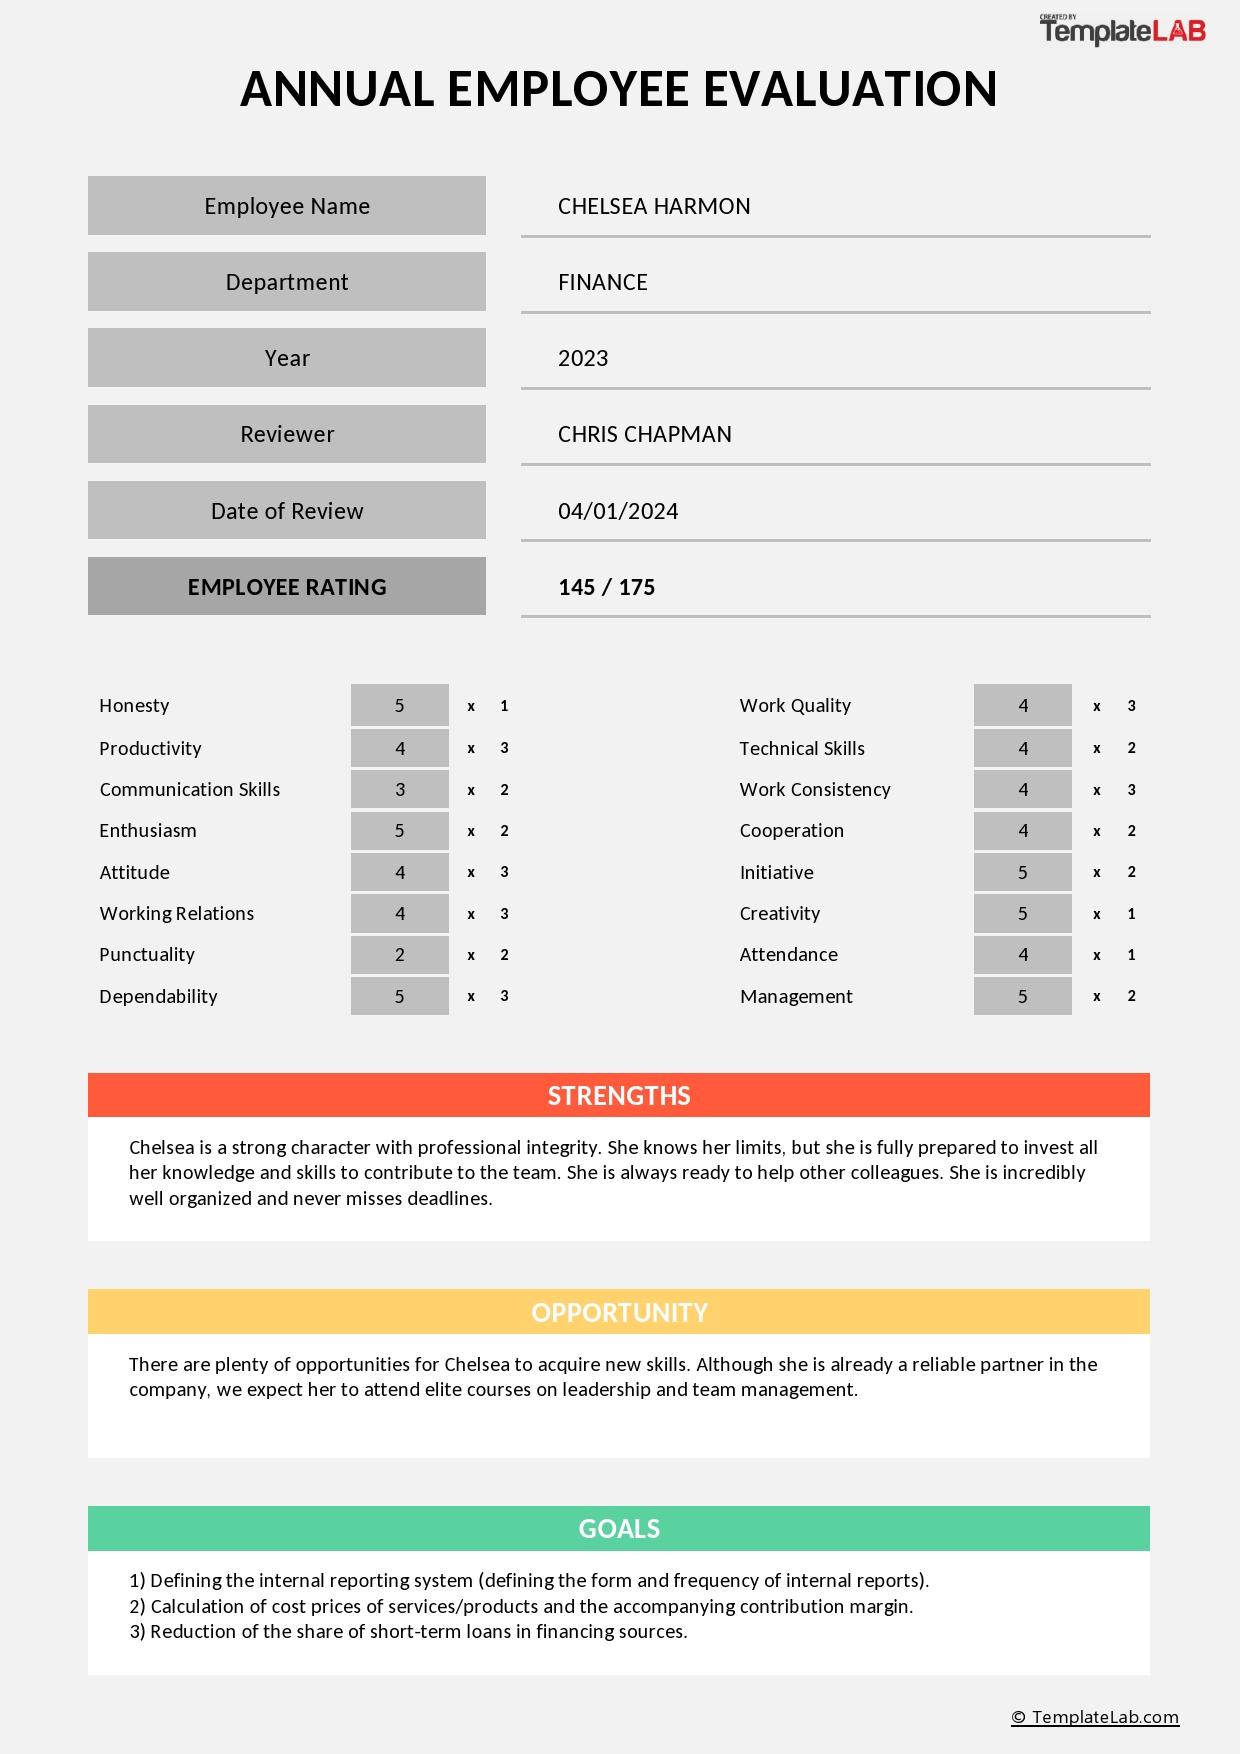 Free Annual Employee Evaluation Template